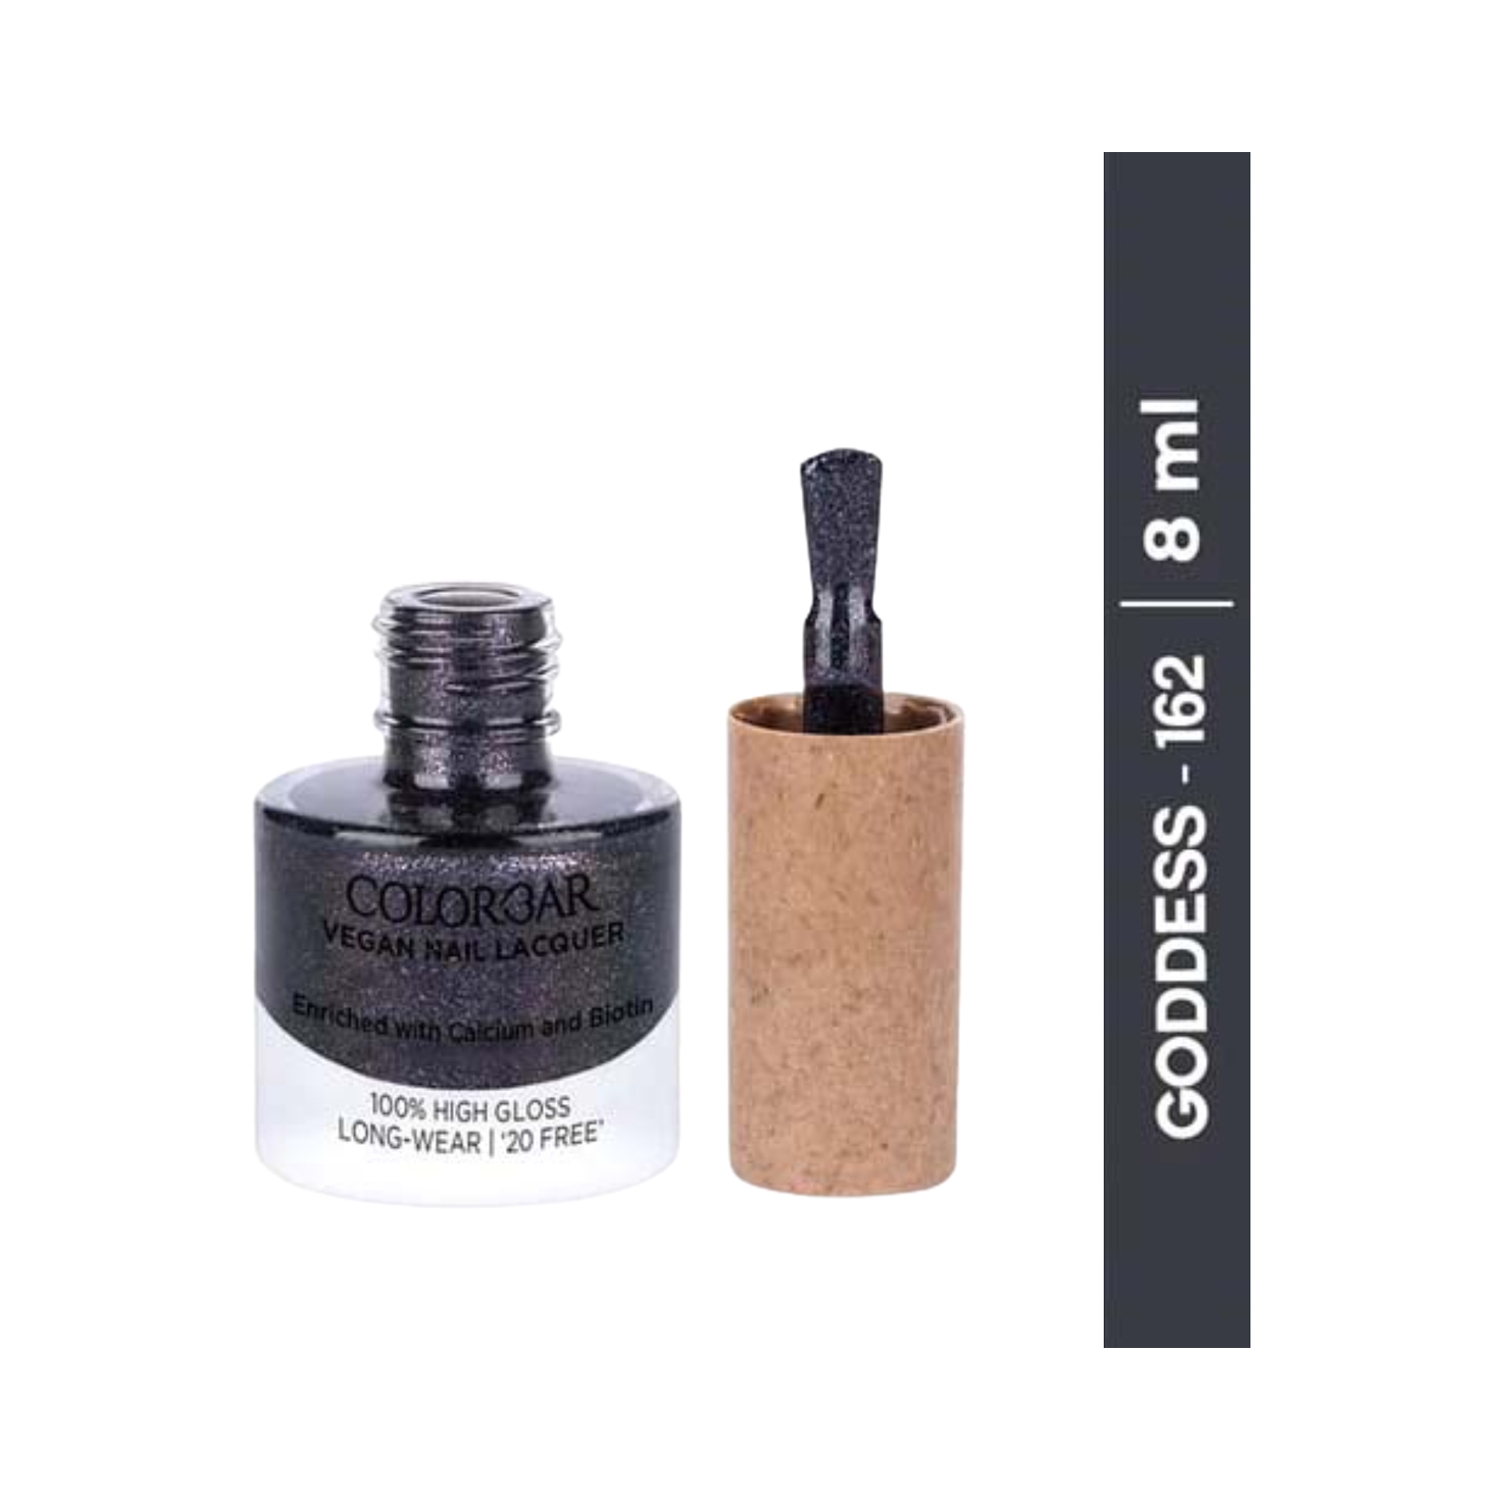 Buy Colorbar Matte Nail Lacquer, Sweet Lilac-003, 12ml Online at Low Prices  in India - Amazon.in